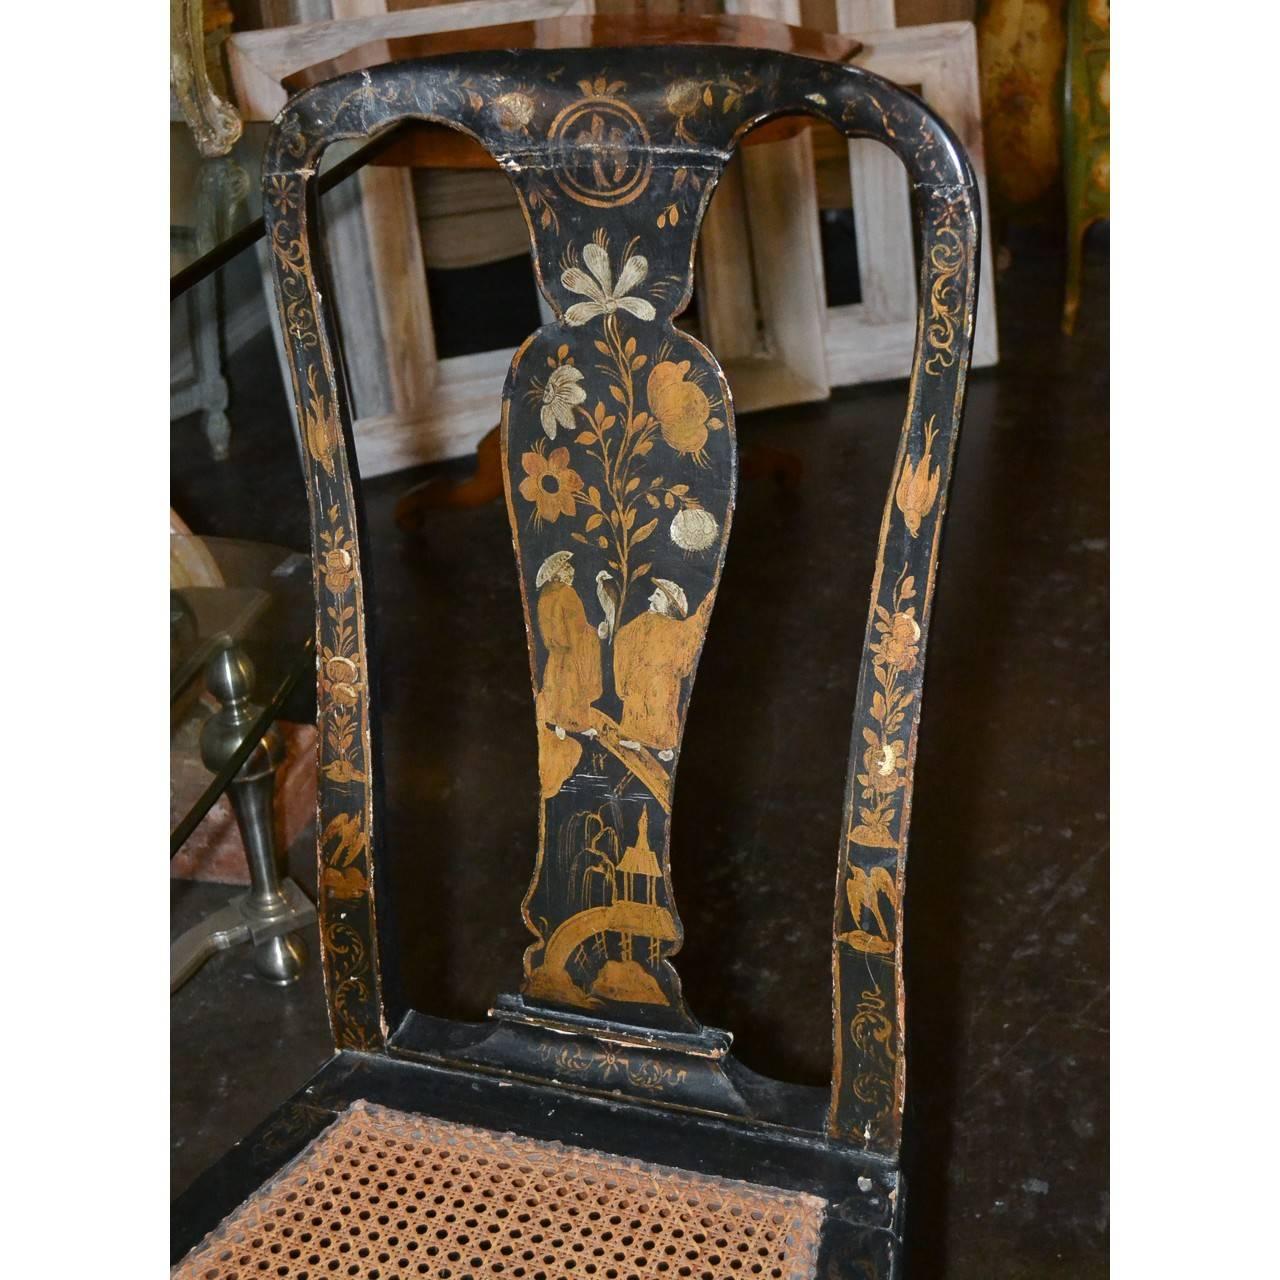 Remarkable pair of 18th century hand-painted armchairs with sought after cane seats. Made in England.